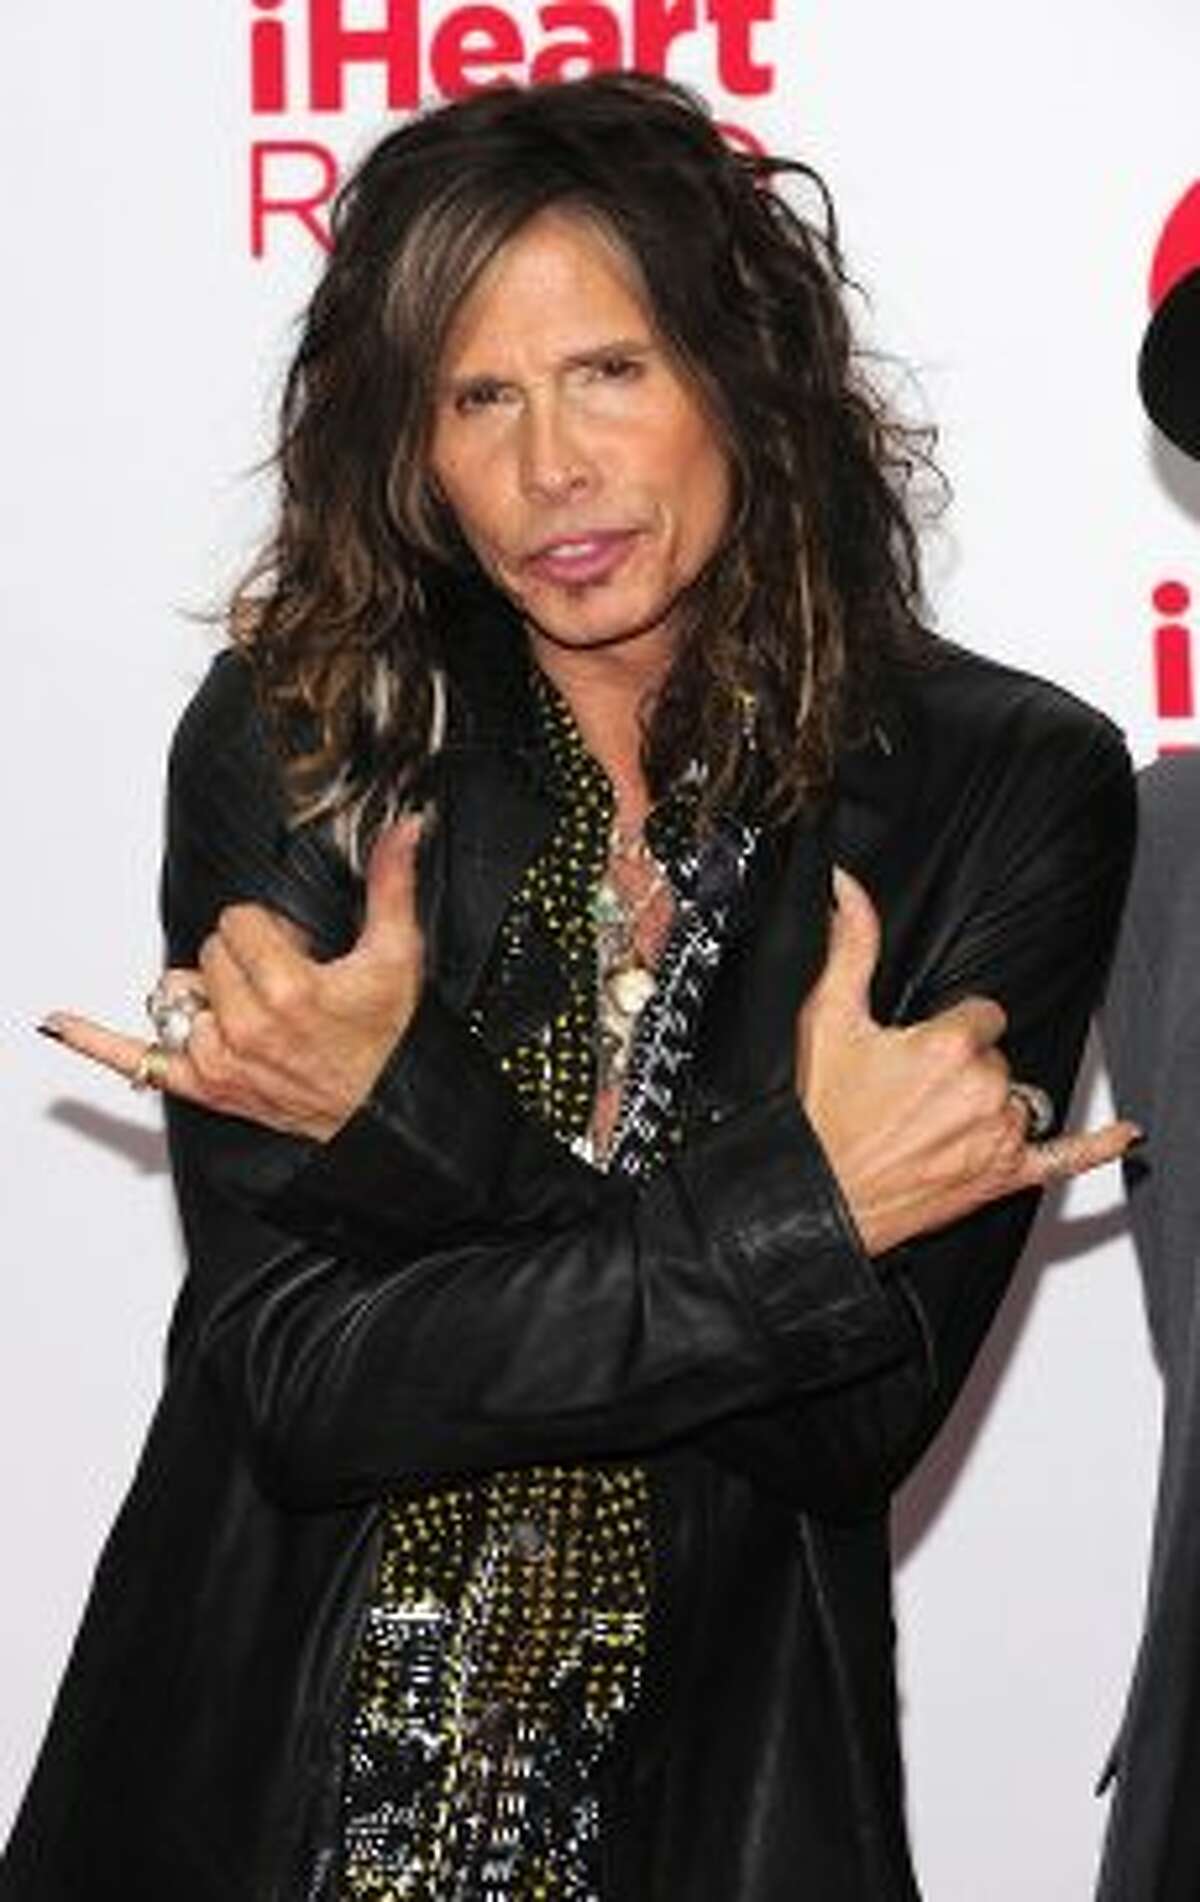 Hawaiis Proposed Steven Tyler Act Protects Stars From Paparazzi